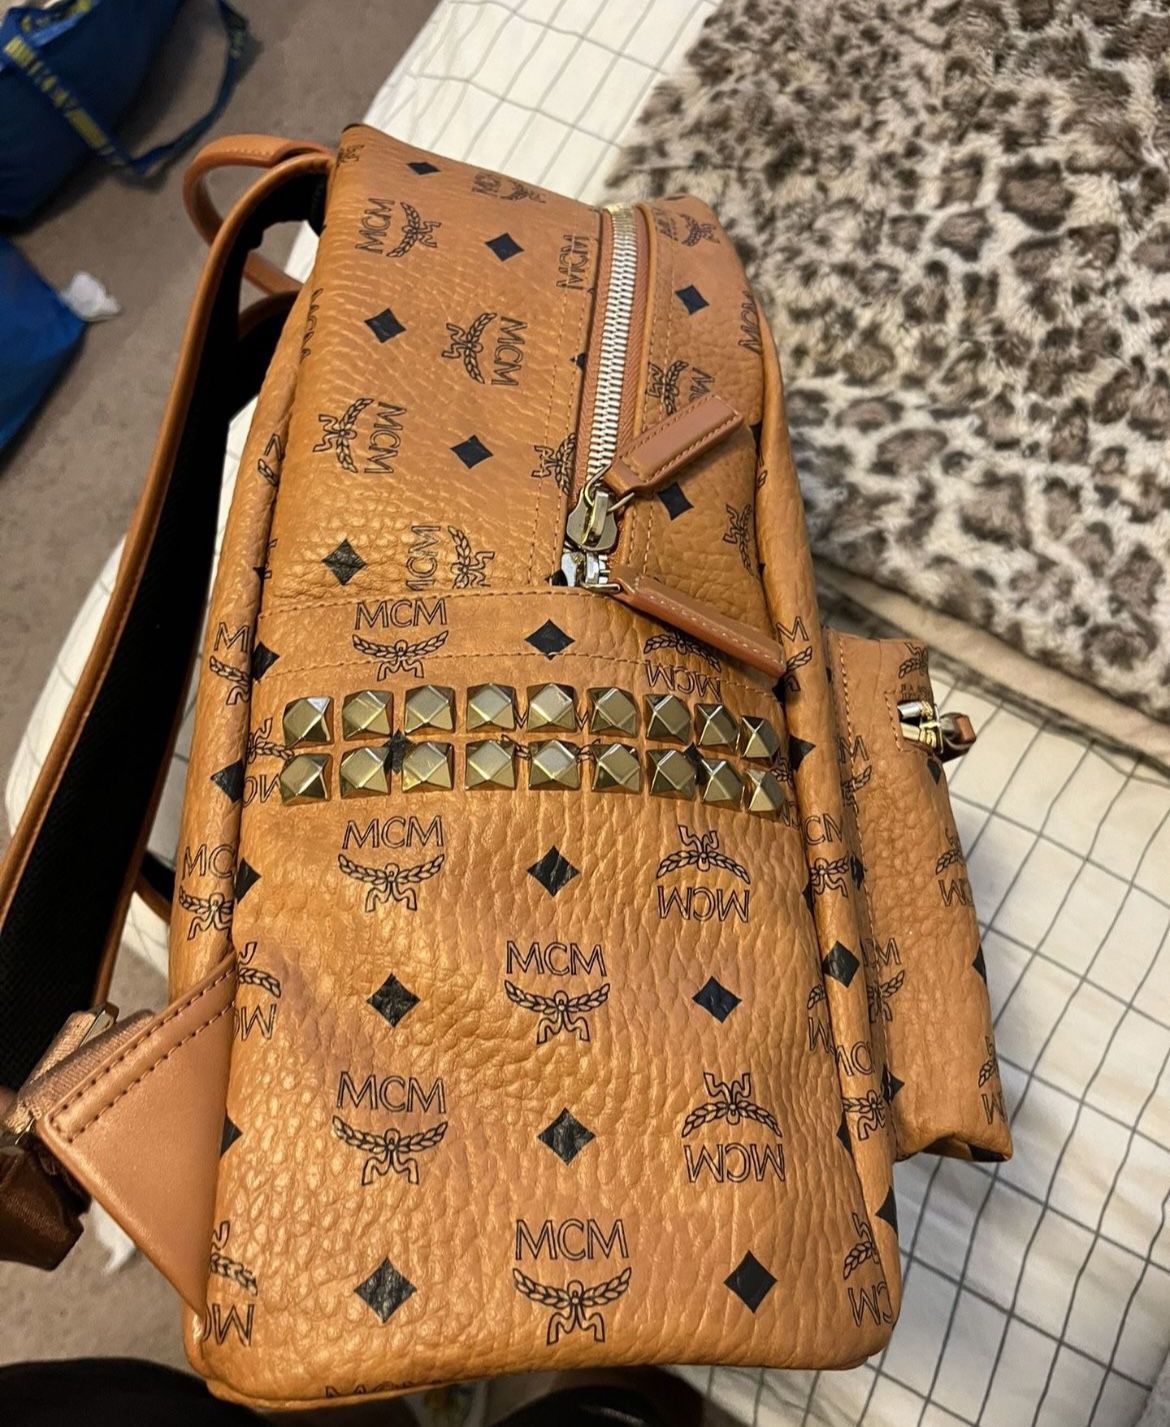 Authentic Mcm Bag for Sale in Moorhead, MN - OfferUp